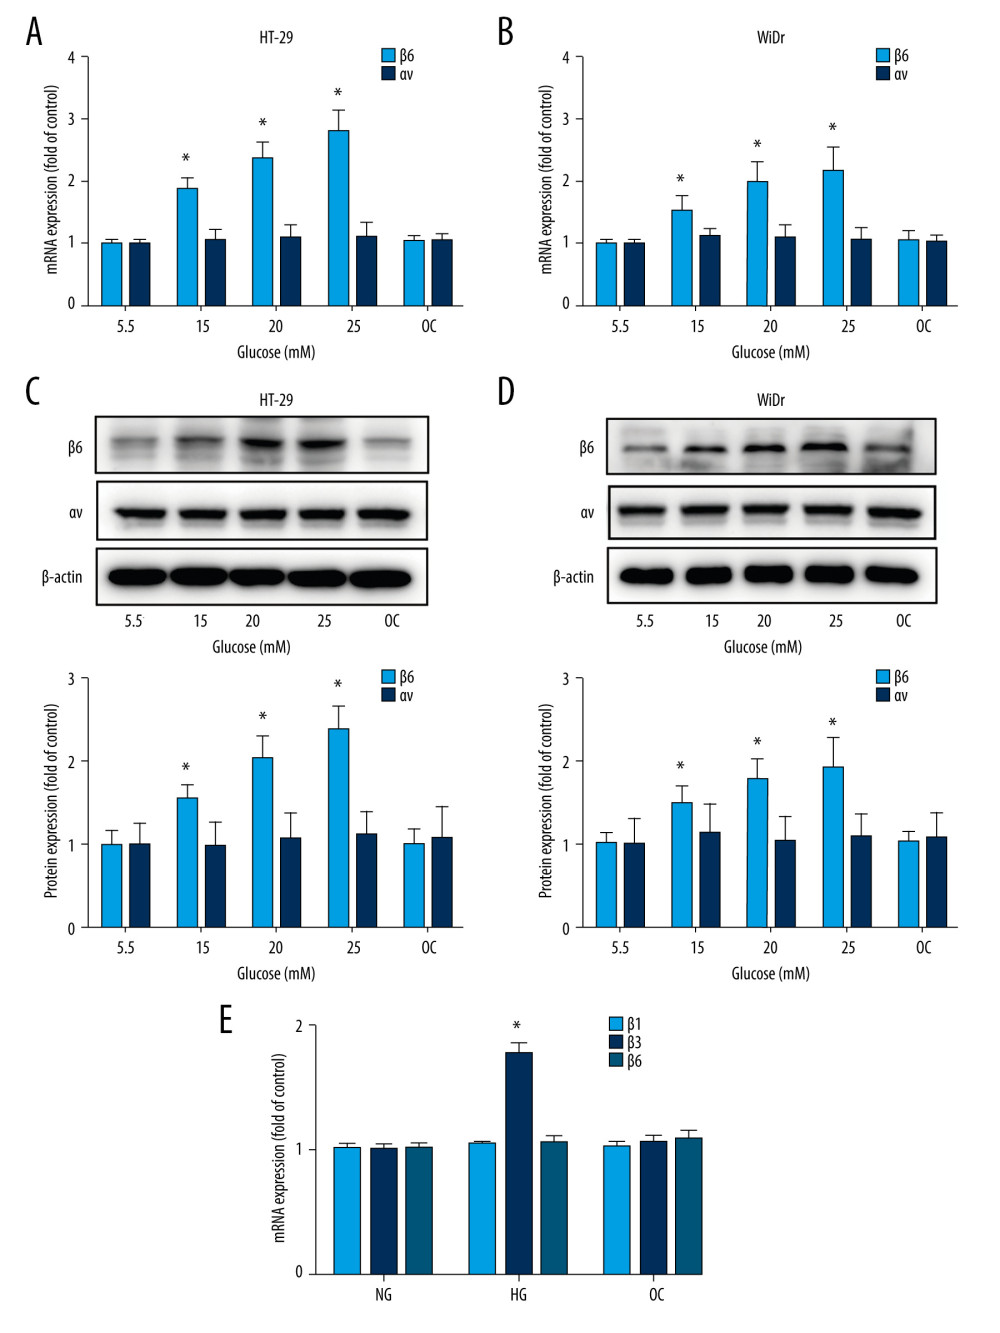 High glucose induced upregulation of integrin β6. HT-29 and WiDr cells were incubated with medium containing various concentrations of glucose for 24 h, and expression of integrin β6 and αv was measured by real-time PCR (A, B) and western blot (C, D). (E) Expression of integrin β1, β3, and β5 was detected by real-time PCR in HT-29 cells. Mean±SD of 3 independent experiments. * P<0.05 vs control. OC – osmotic control; NG – normal glucose; HG – high glucose.